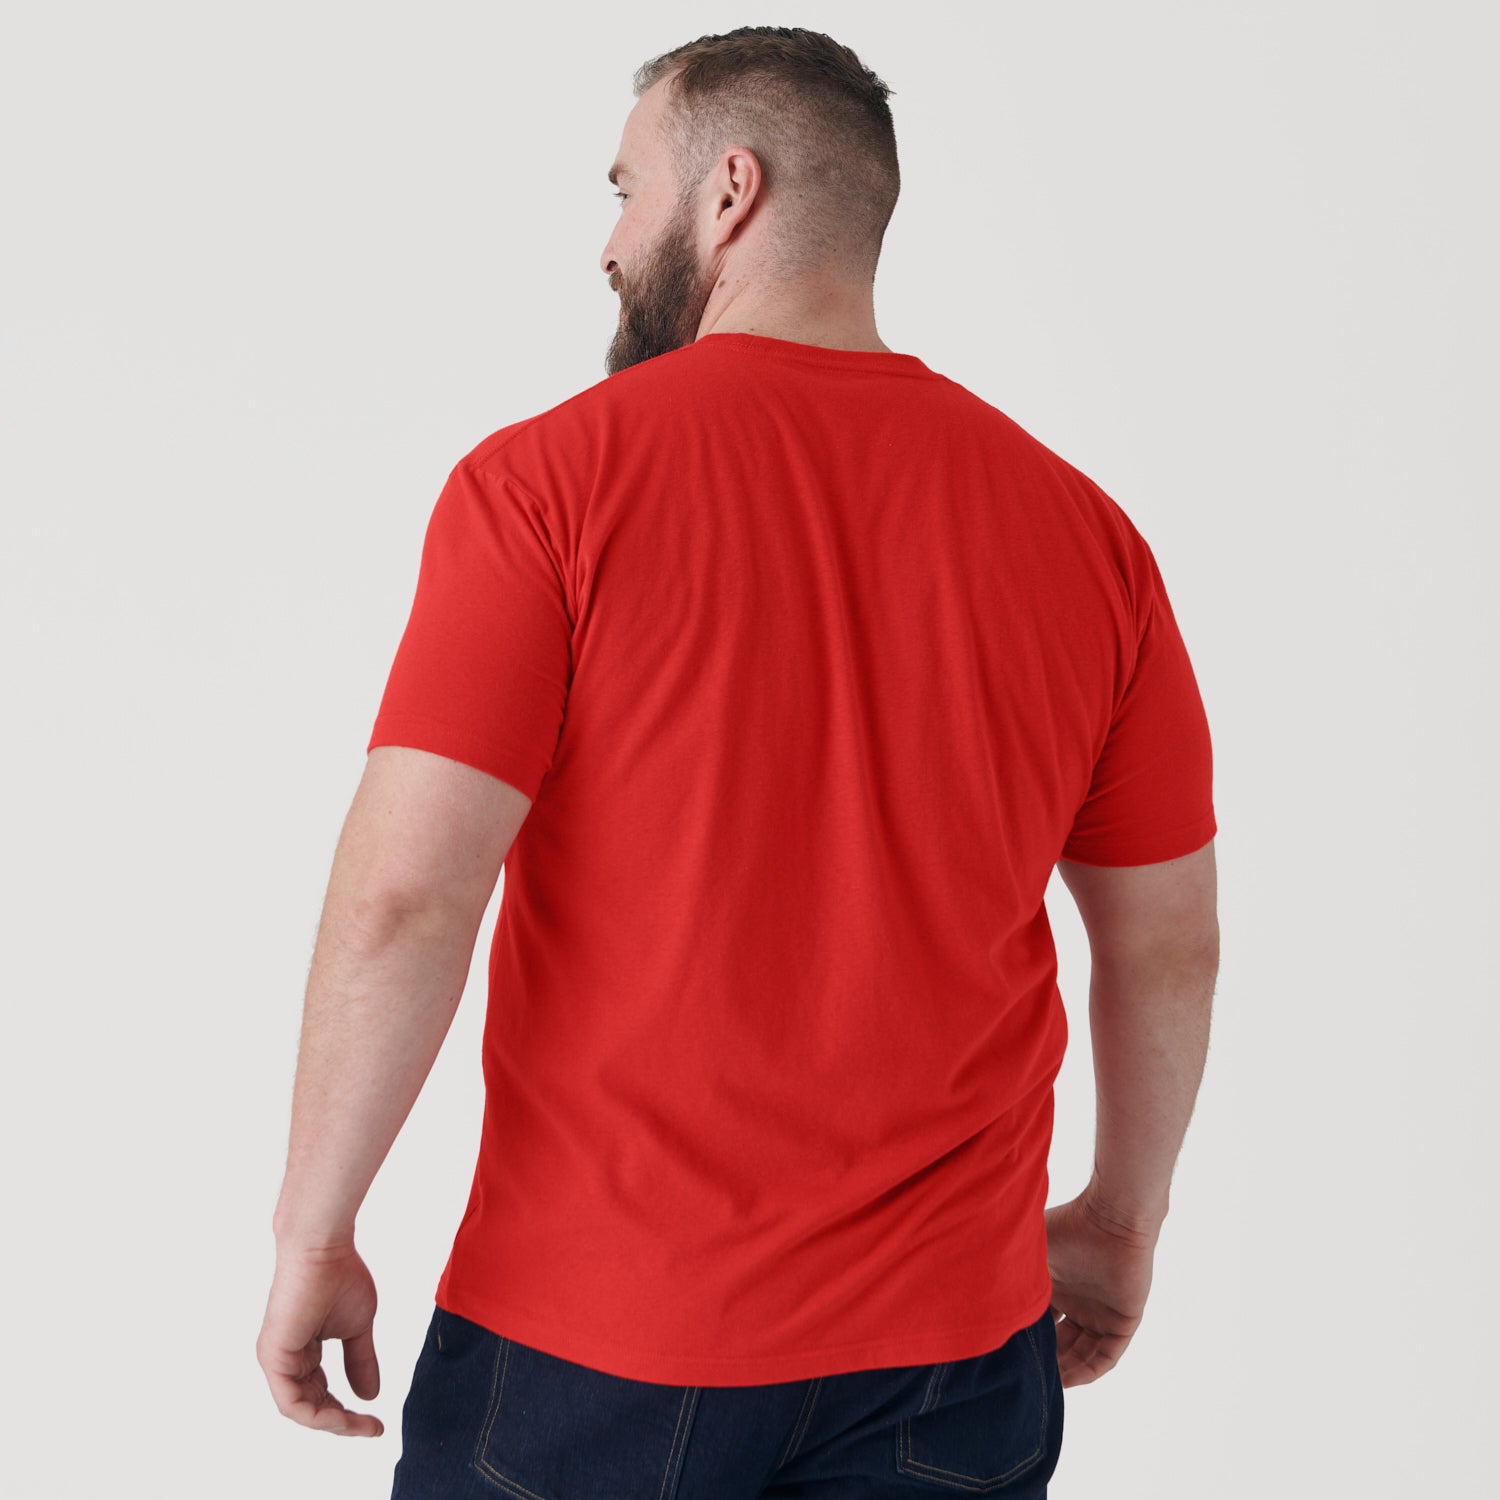 plain red shirt front and back